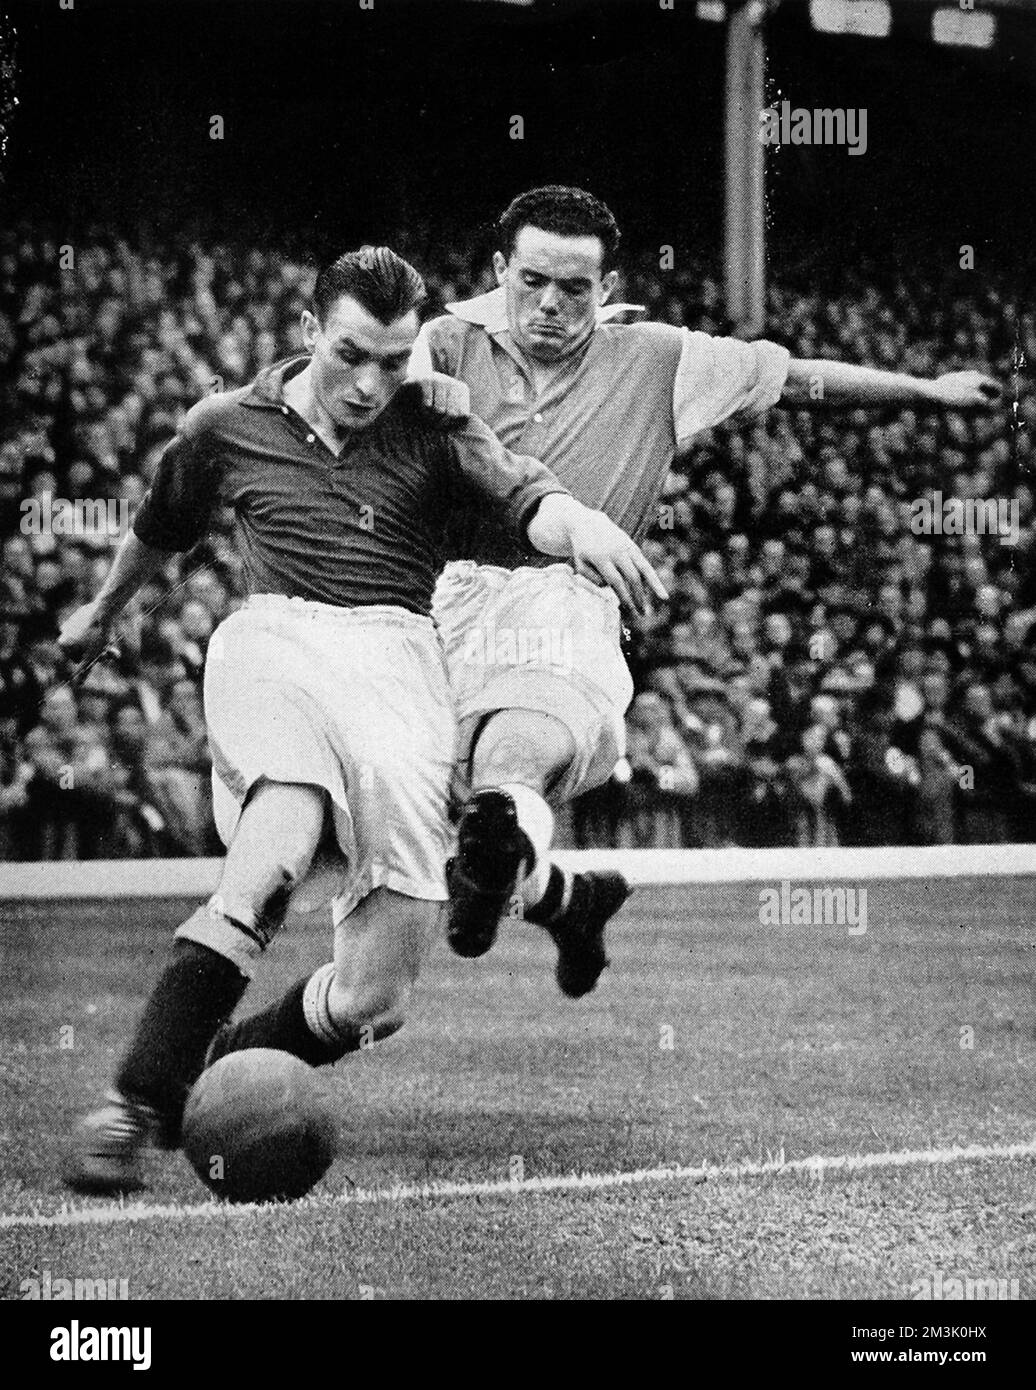 Bryn Jones of Arsenal (right) tackling Gillick of Everton, during the First Division Match played at Highbury, London, September 1938. Jones scored for Arsenal, but Everton won 2-1.     Date: 1938 Stock Photo